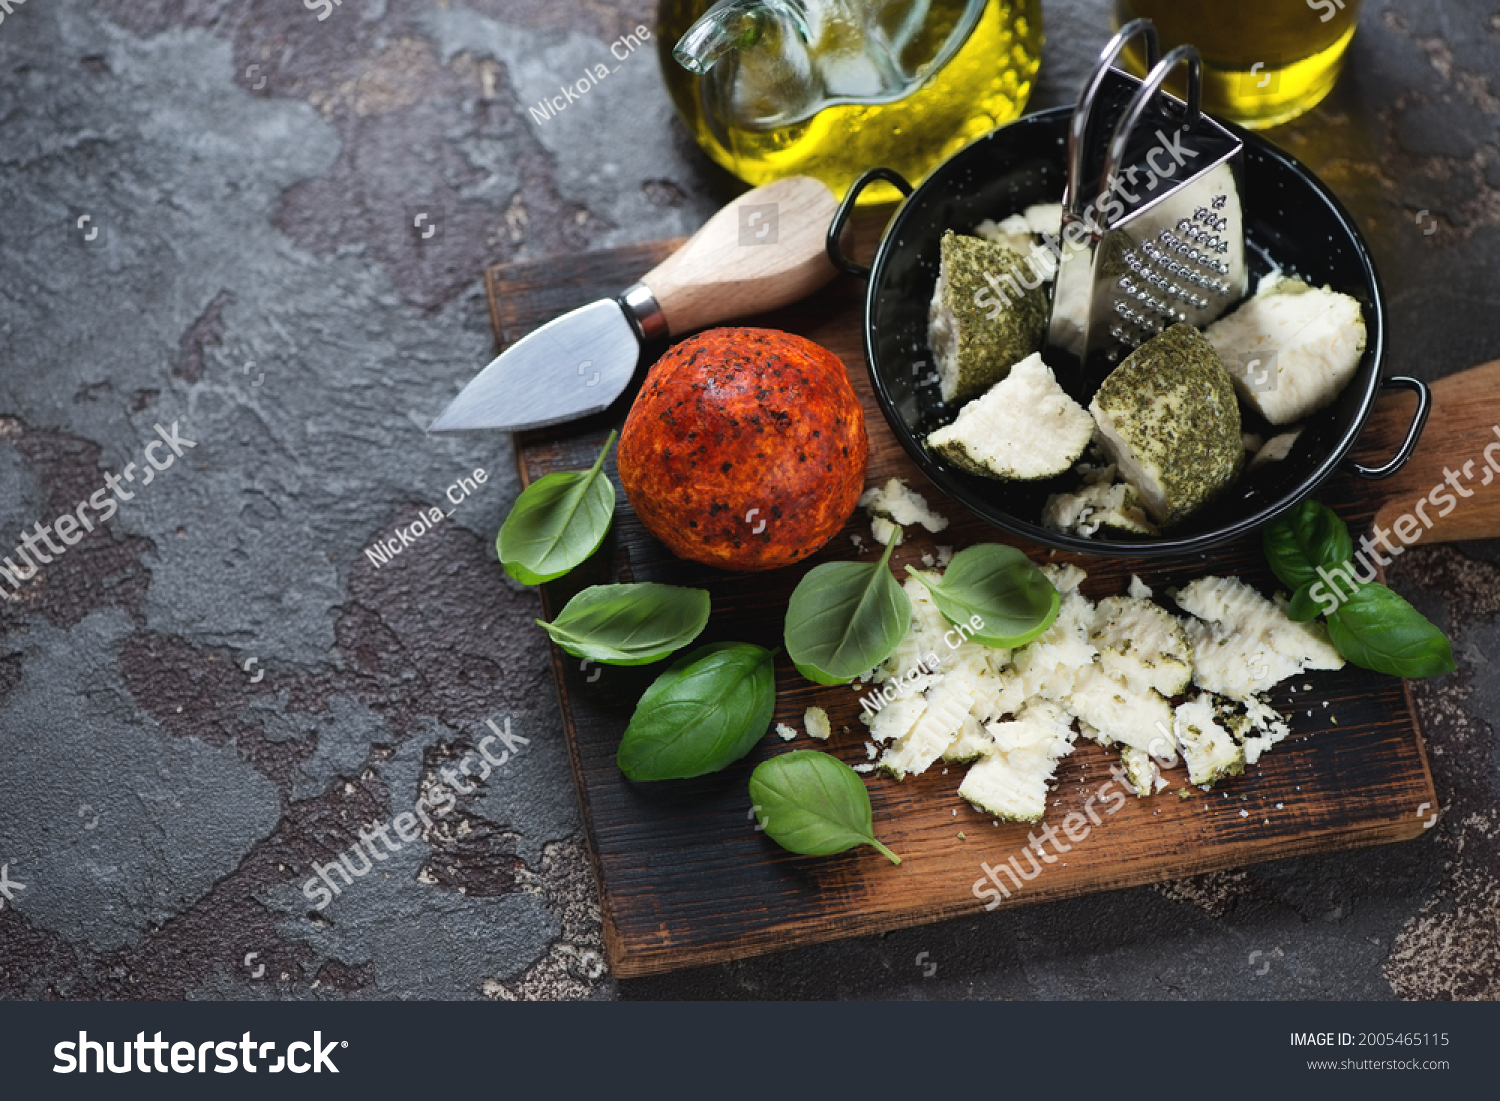 Swiss belper knolle cheese with green basil leaves and olive oil, horizontal shot on a brown stone background with space #2005465115